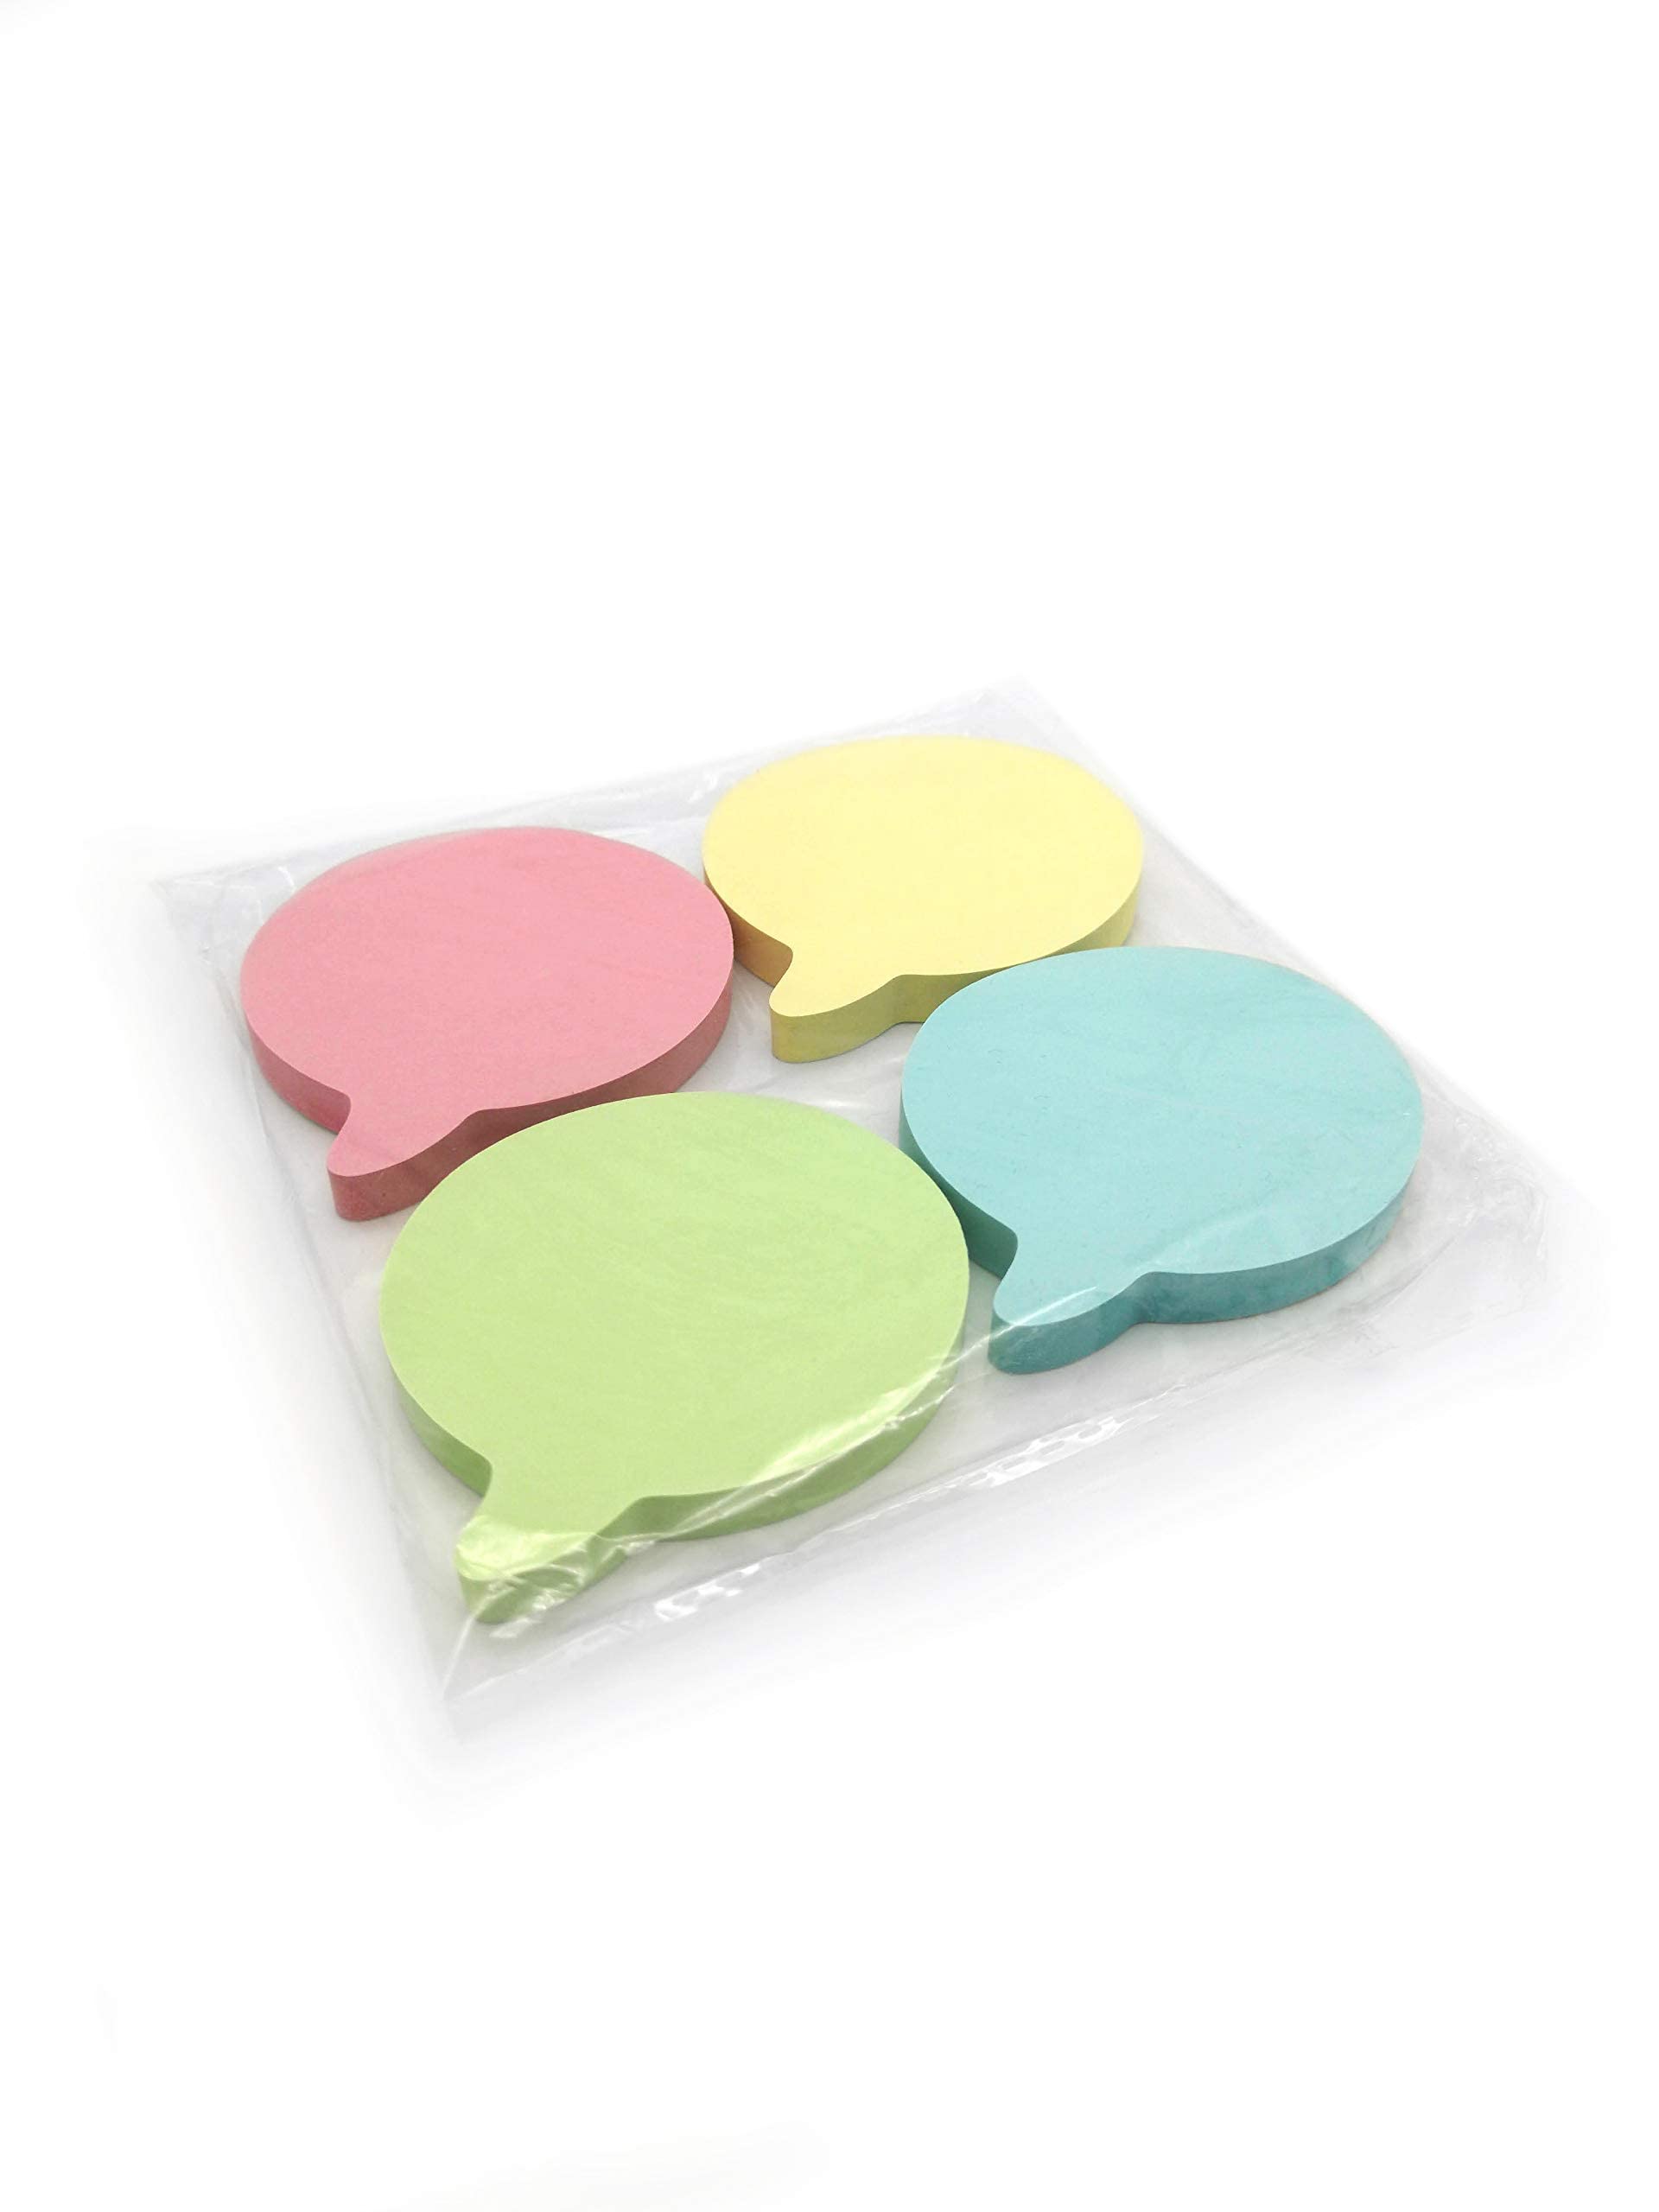 400 Speech Bubble Shaped Sticky Notes - Pastel Colours (76x76mm) - Colourful Removable Memo Pads in Blue, Pink, Green, Yellow   Set of 4 Pads (100 Sheets Each)   Office, Home & School Use - 4 Packs